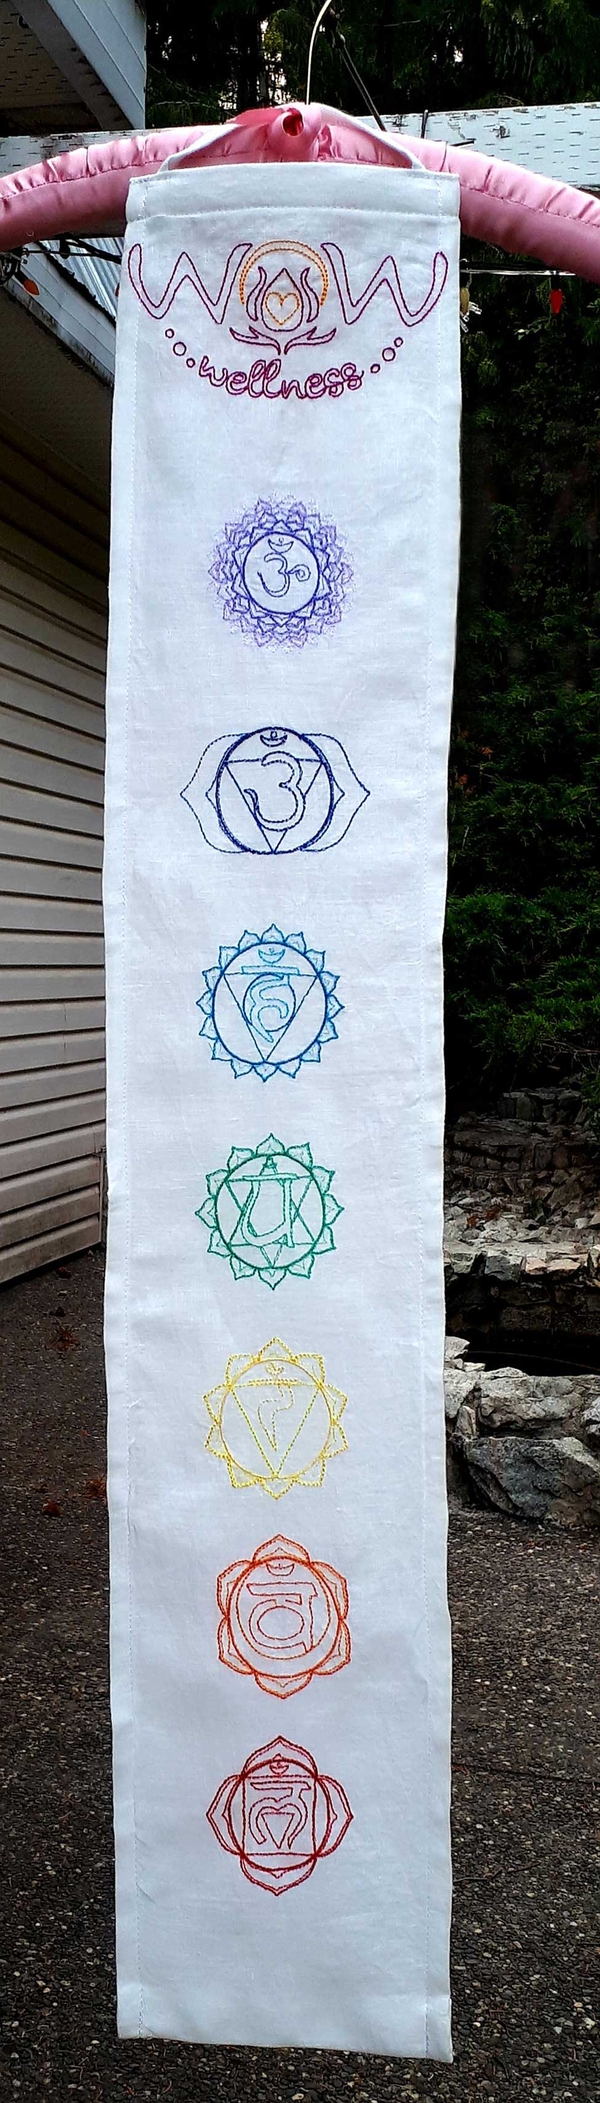 REBECCA, I created this banner for a Yoga Retreat featuring my own embroidered Chakra designs on IL019 Bleac...